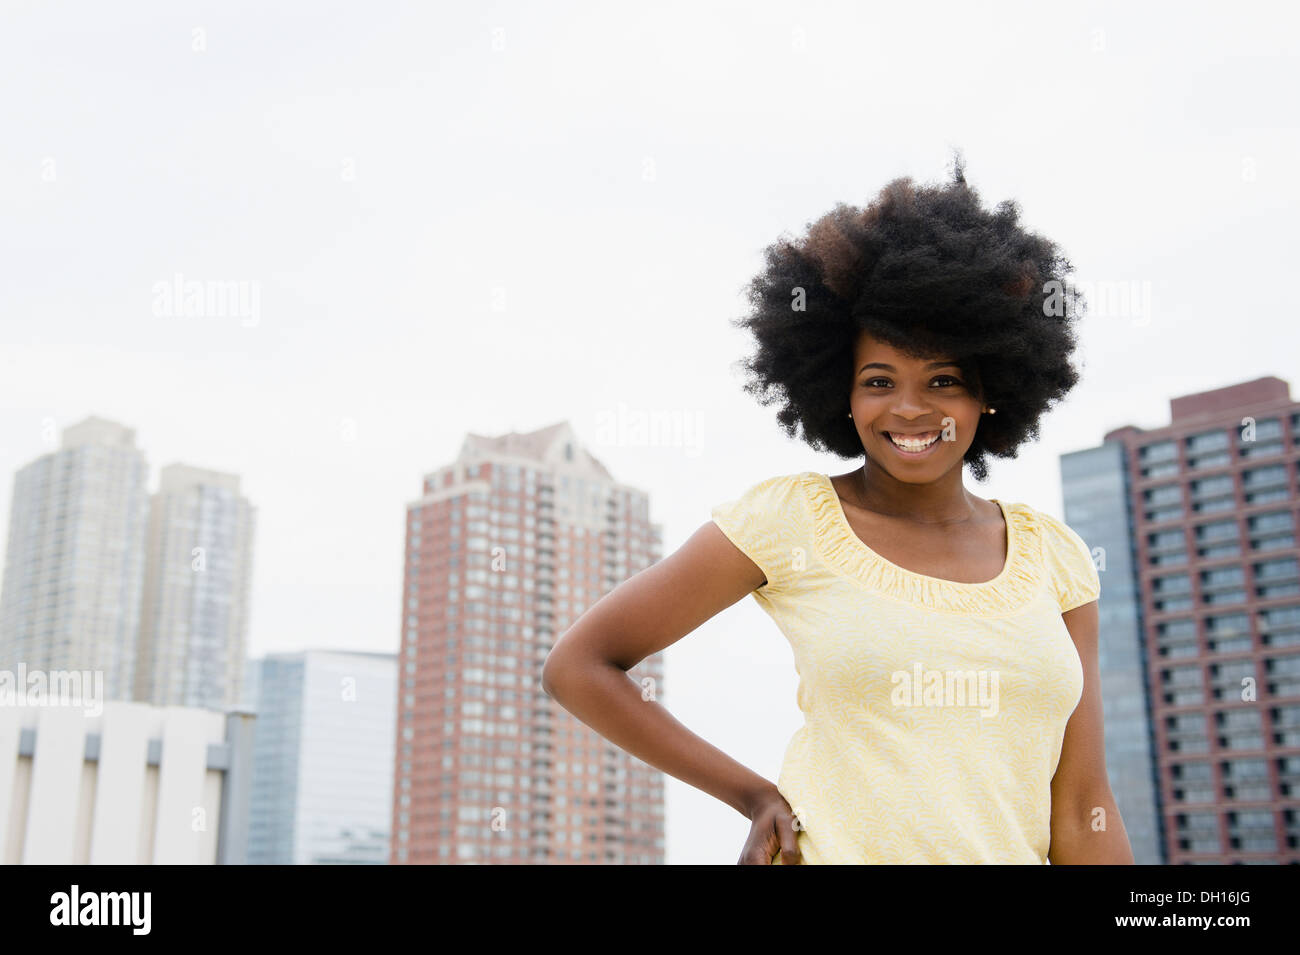 Mixed race woman smiling on urban rooftop Stock Photo